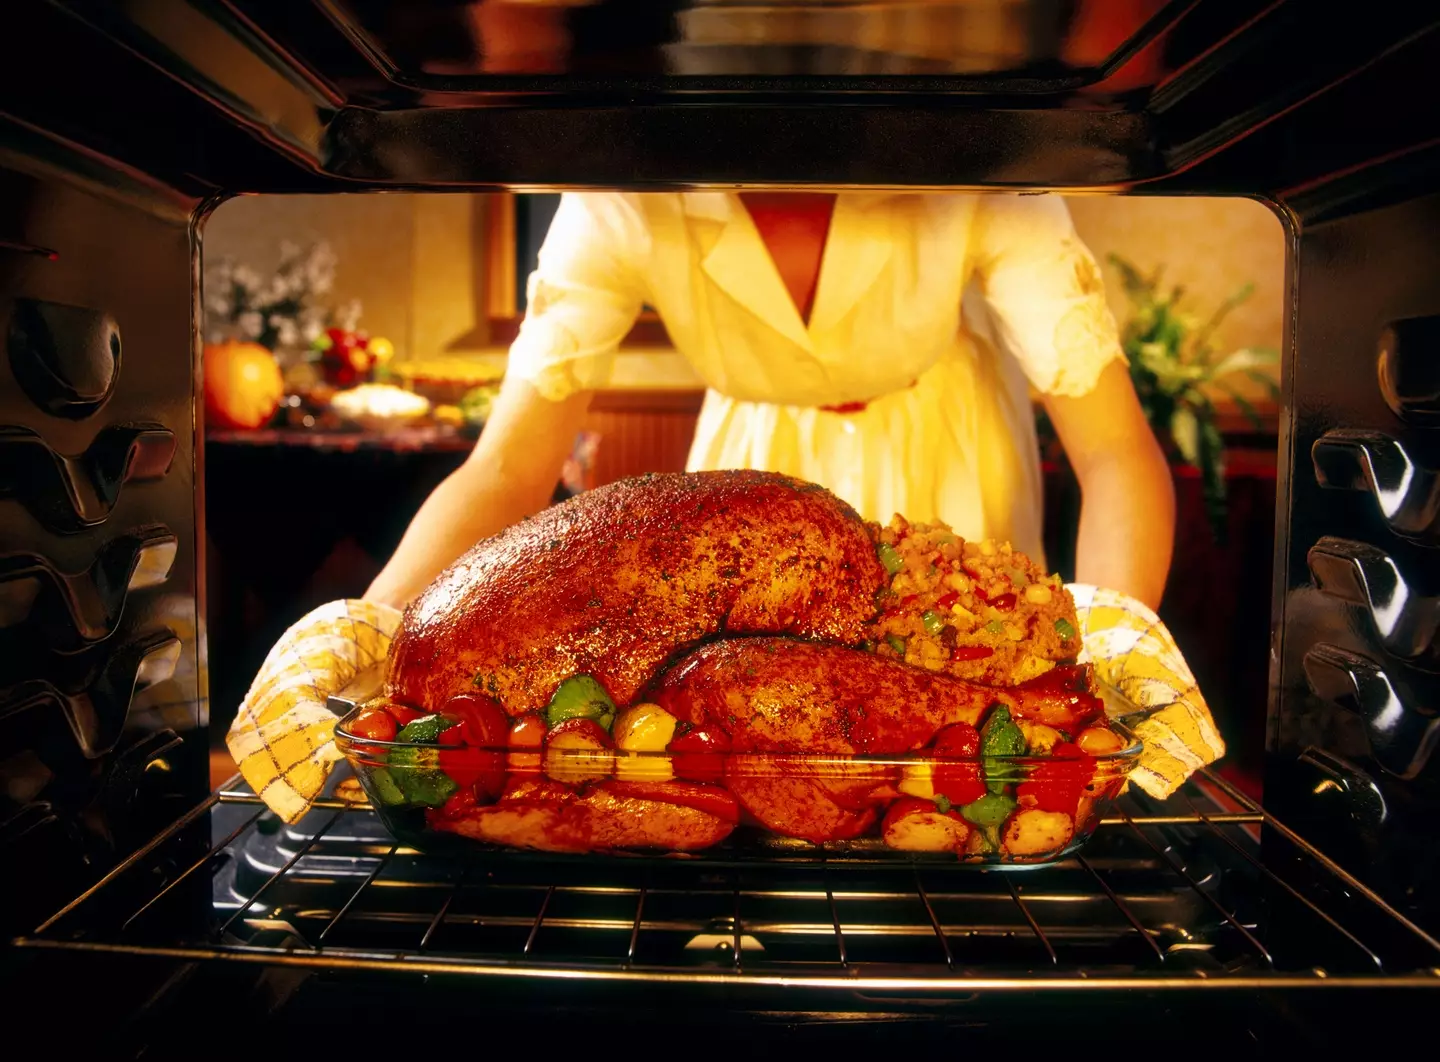 A turkey, an absolutely honking massive bird traditionally eaten at Christmas.